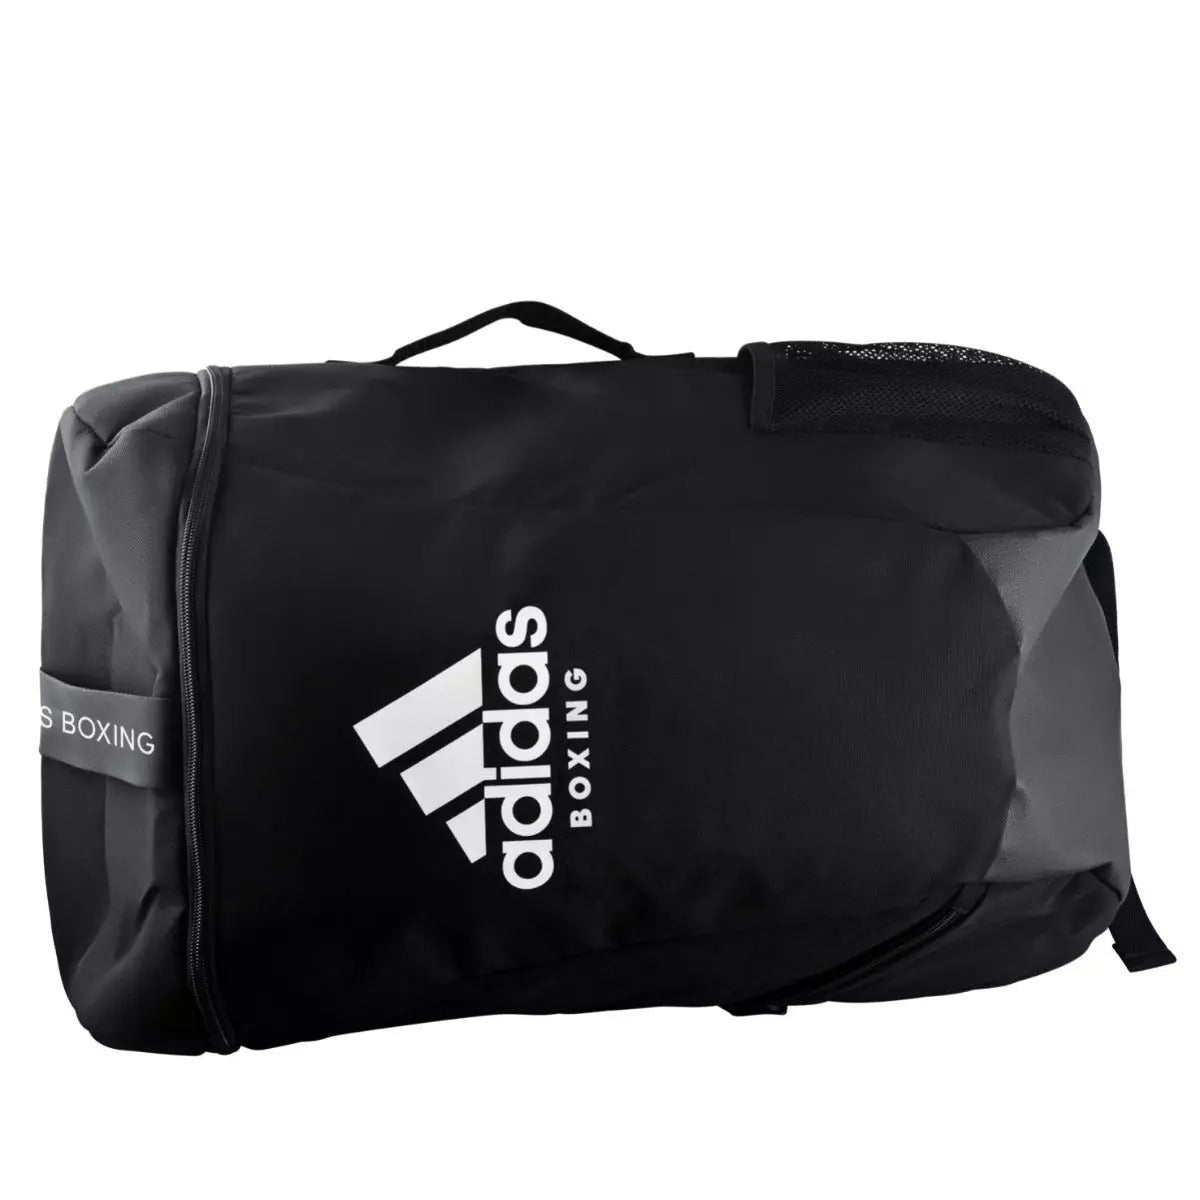 Elevate Your Workout Experience with A Stylish Sports Equipment Bag